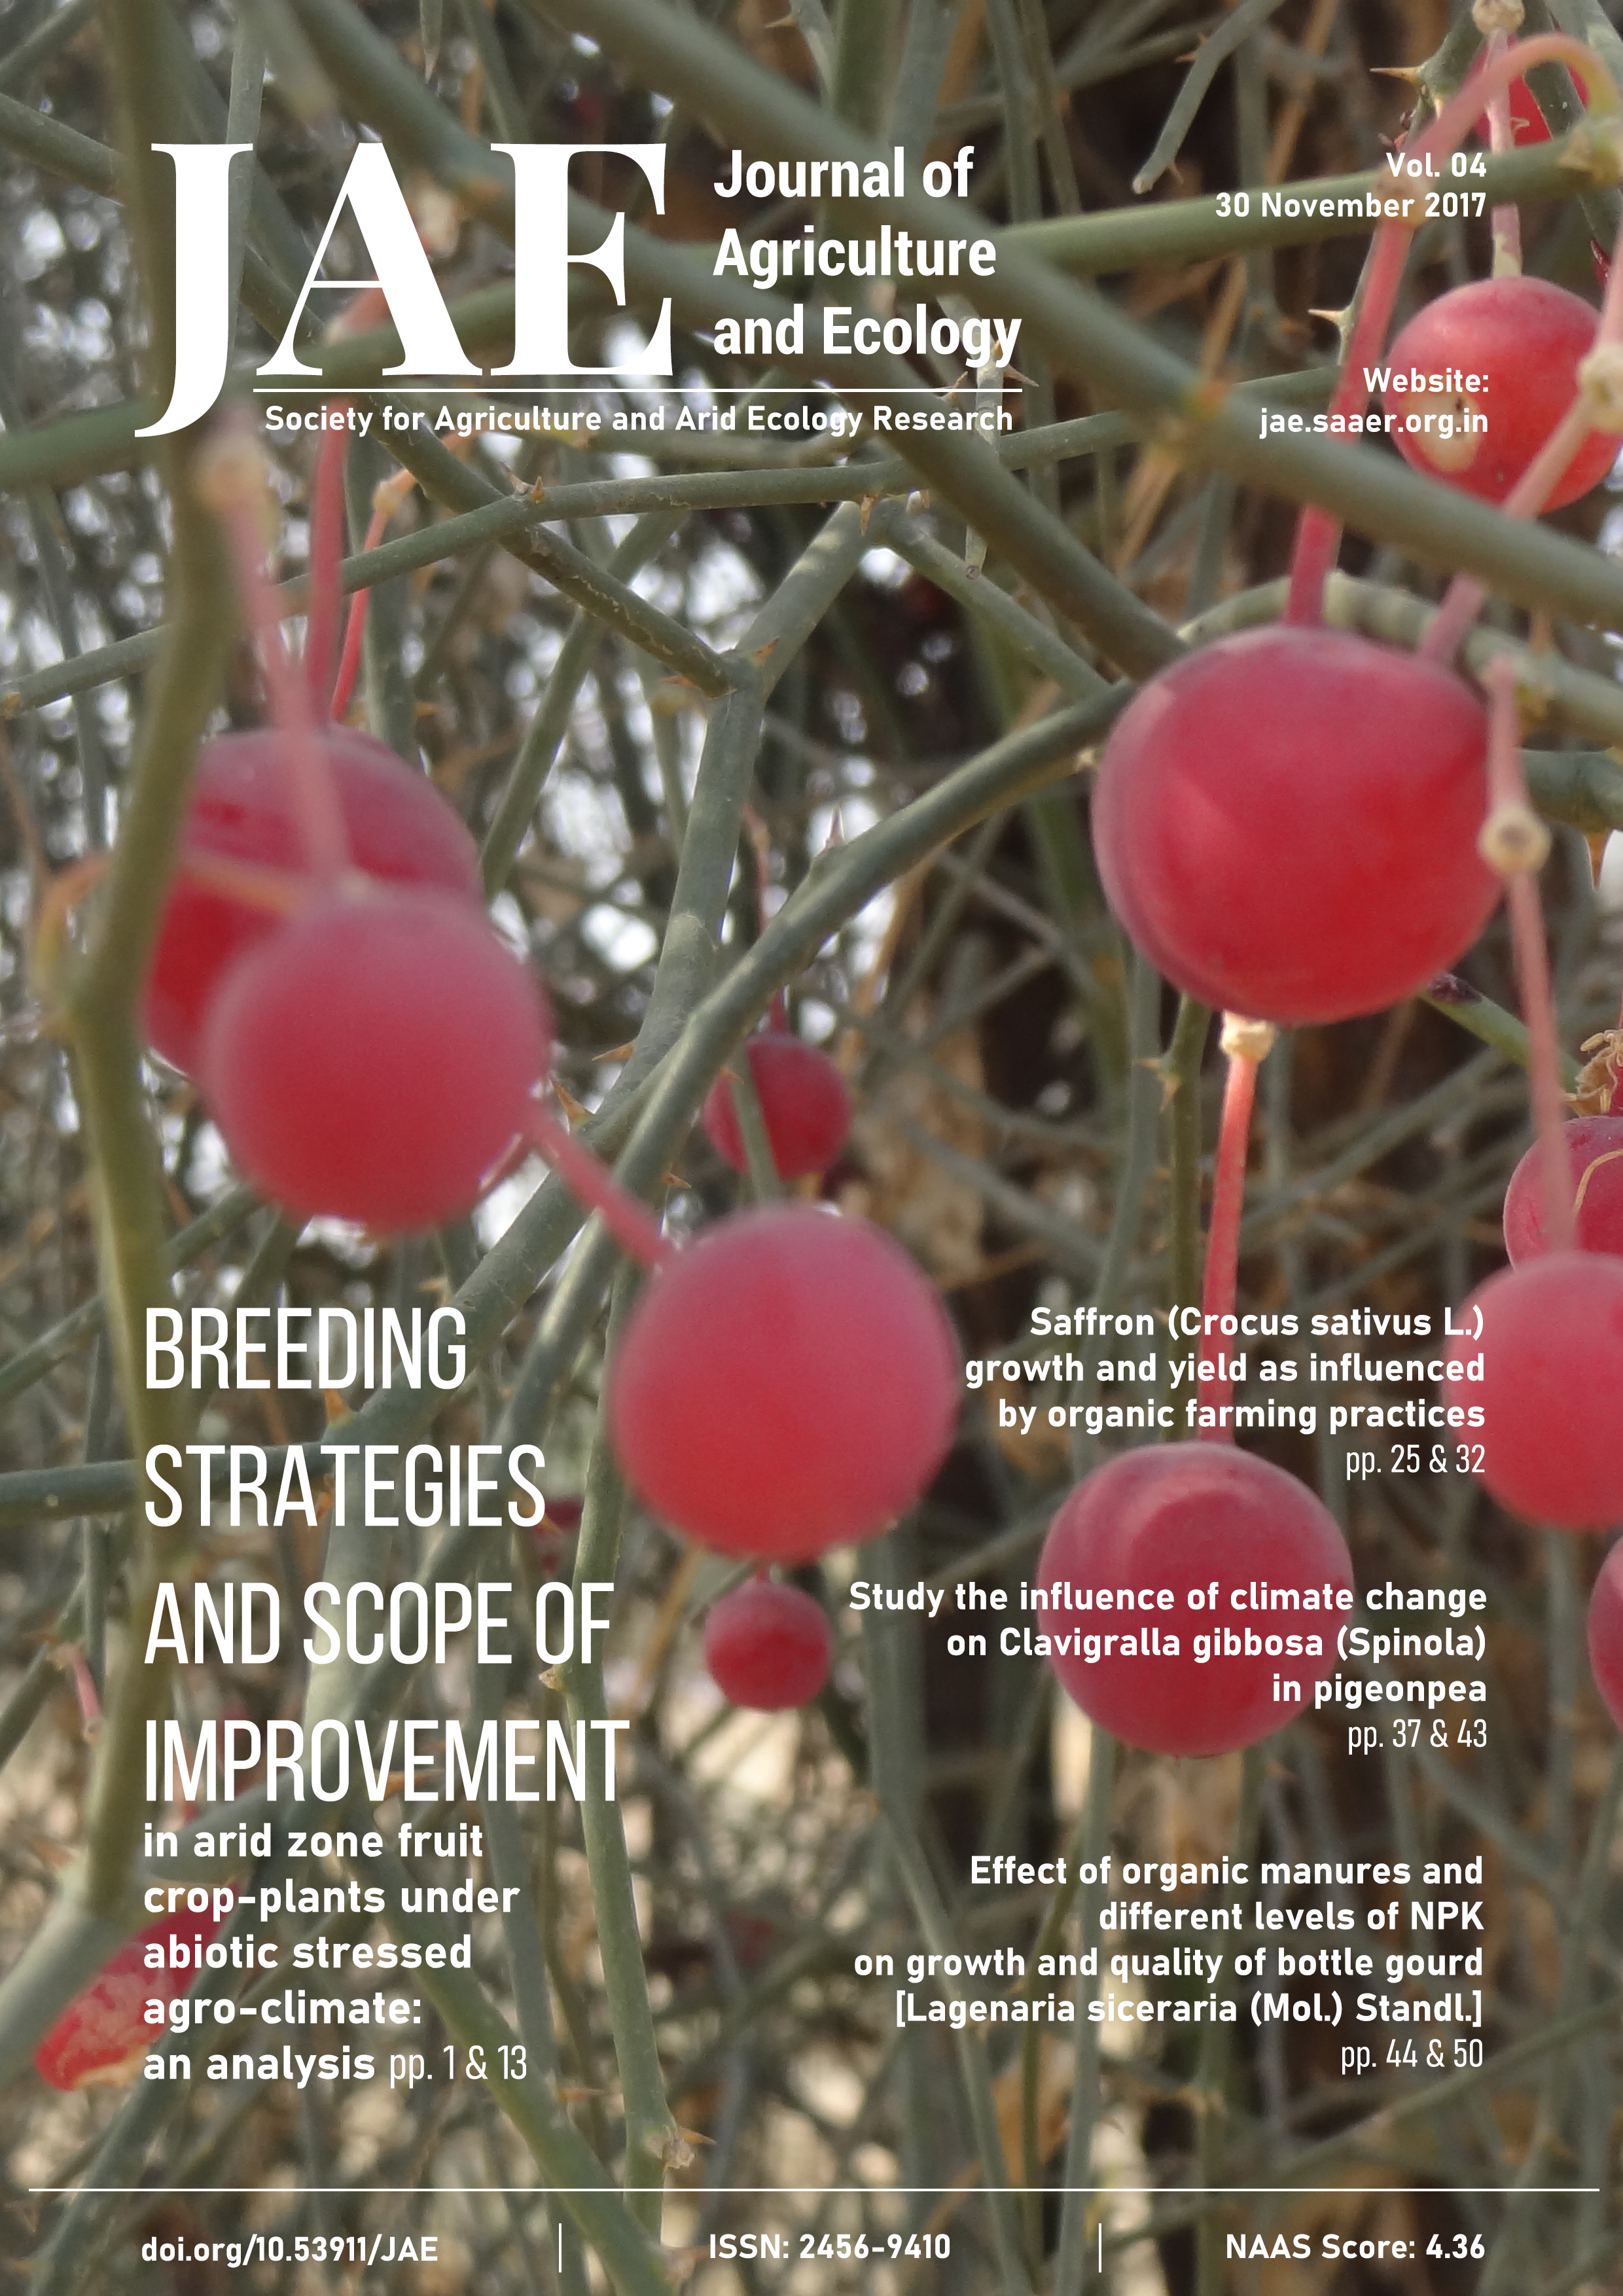 Journal of Agriculture and Ecology Issue 04 Cover